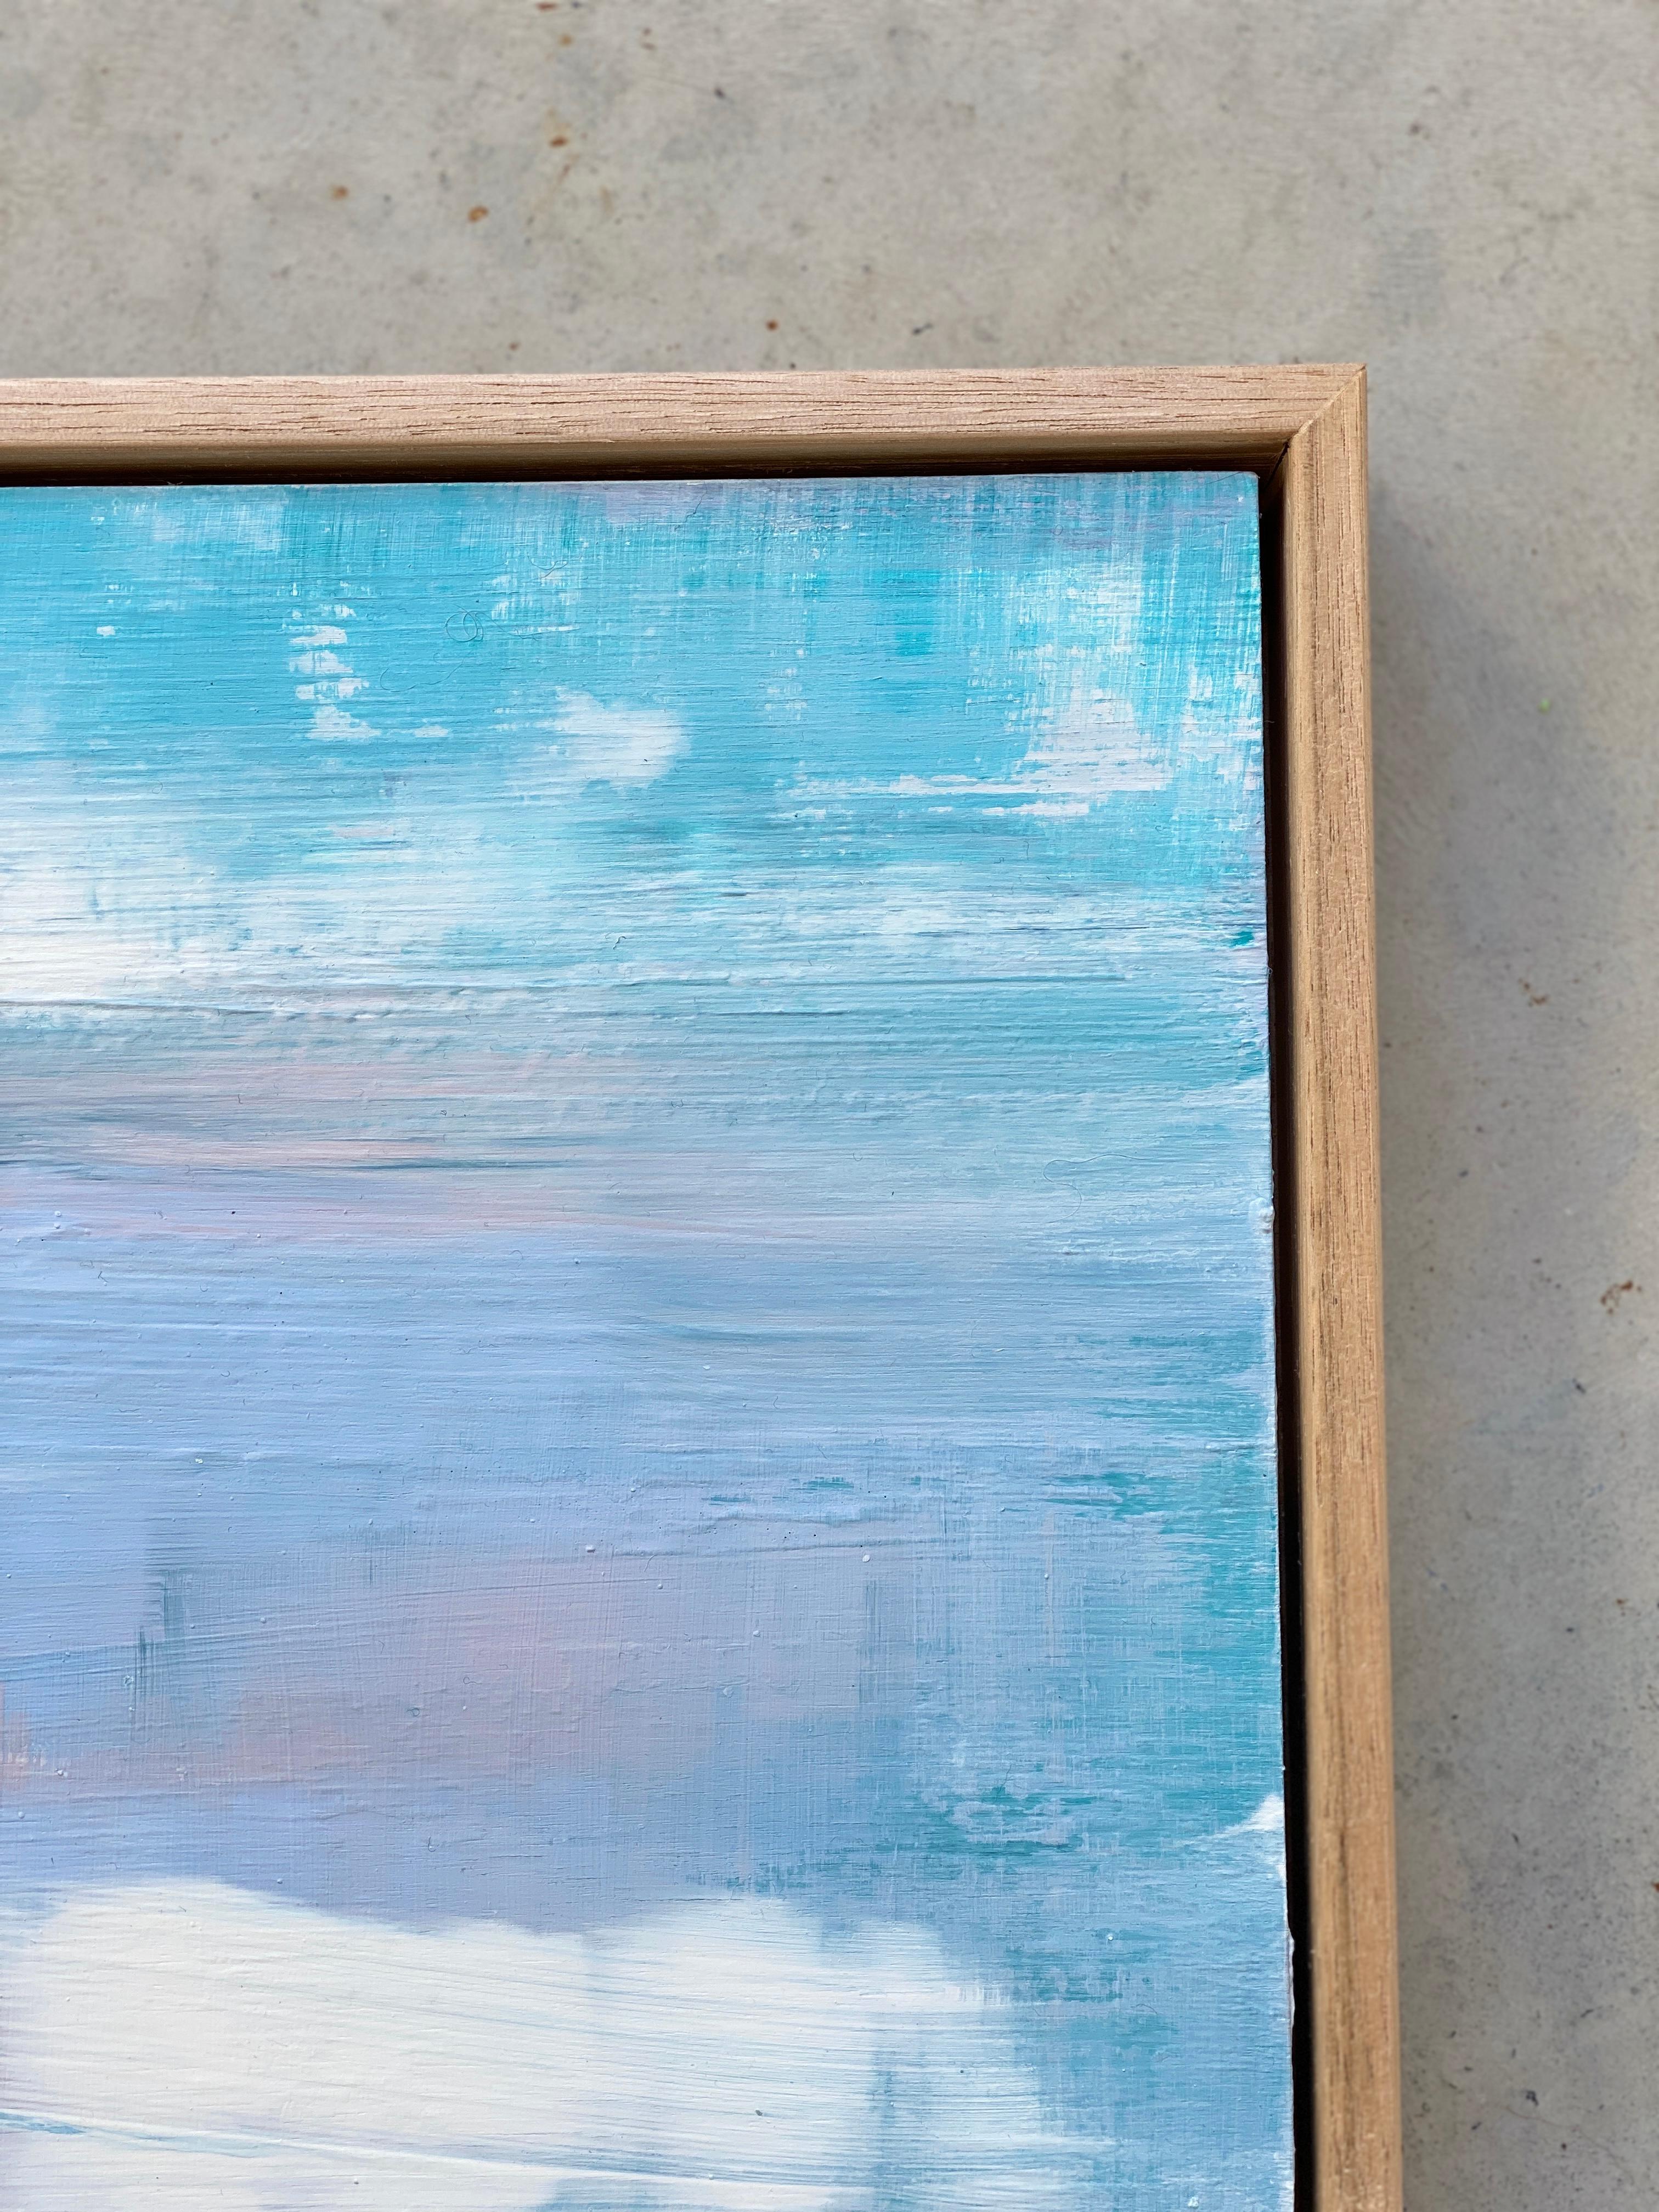 'Floating Away' a small square painting, quality custom framed, minimalist abstract paintings on timber plywood. Lighten up the room with bright, summer colours of pastels and aqua's. Enjoy the energy and feeling of the summer, sun, sea and fun each